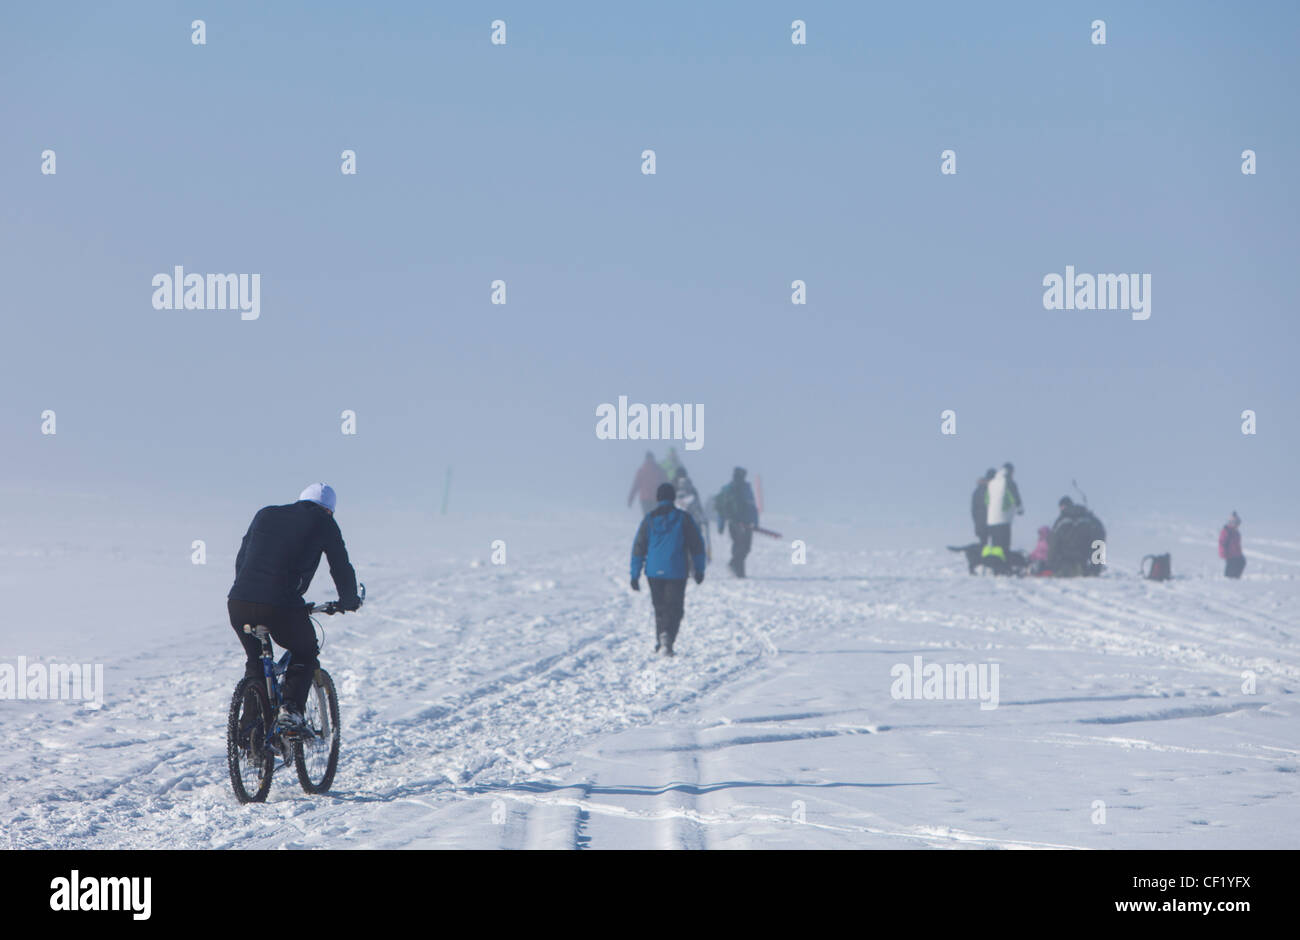 Group of people ice fishing , biking and walking on foggy sea ice at Winter , Finland Stock Photo